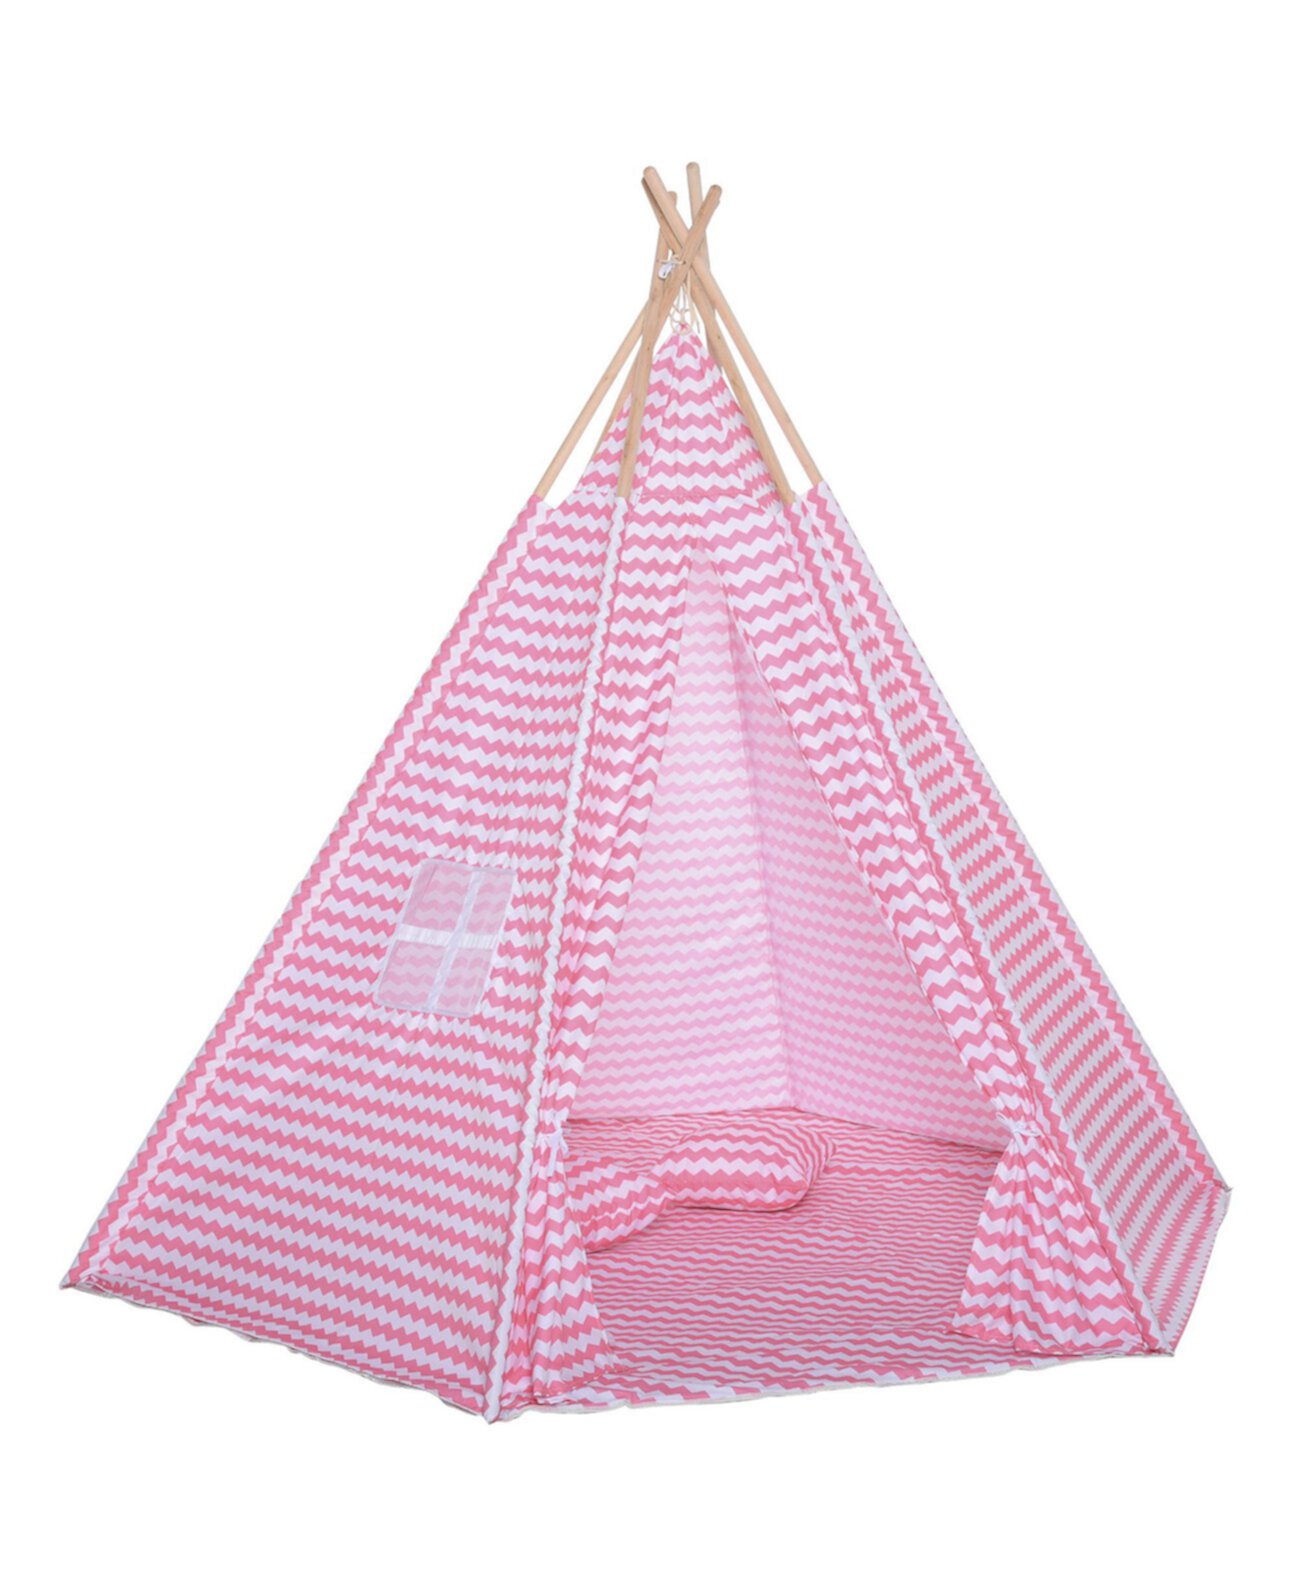 Kids Teepee Indoor Outdoor Play Tent Portable w/ Mat Pillow Carry Case Qaba